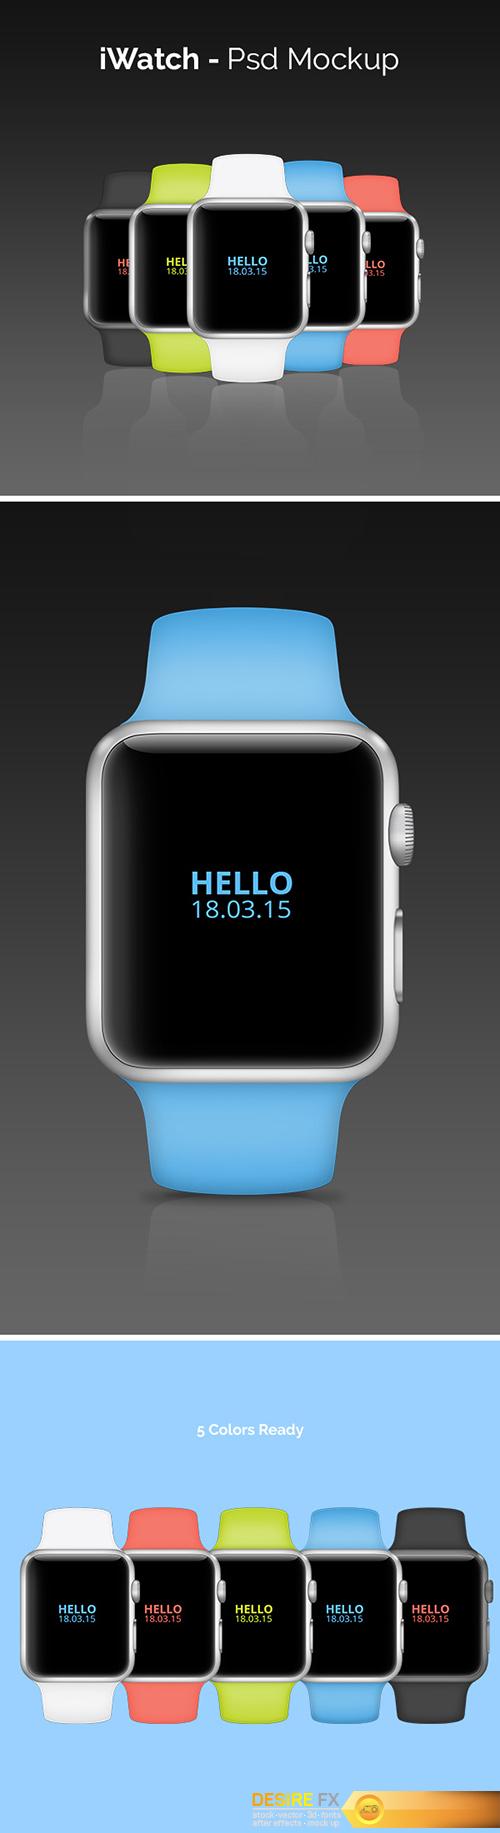 PSD Mock-Up’s – iWatch – 5 Color Style